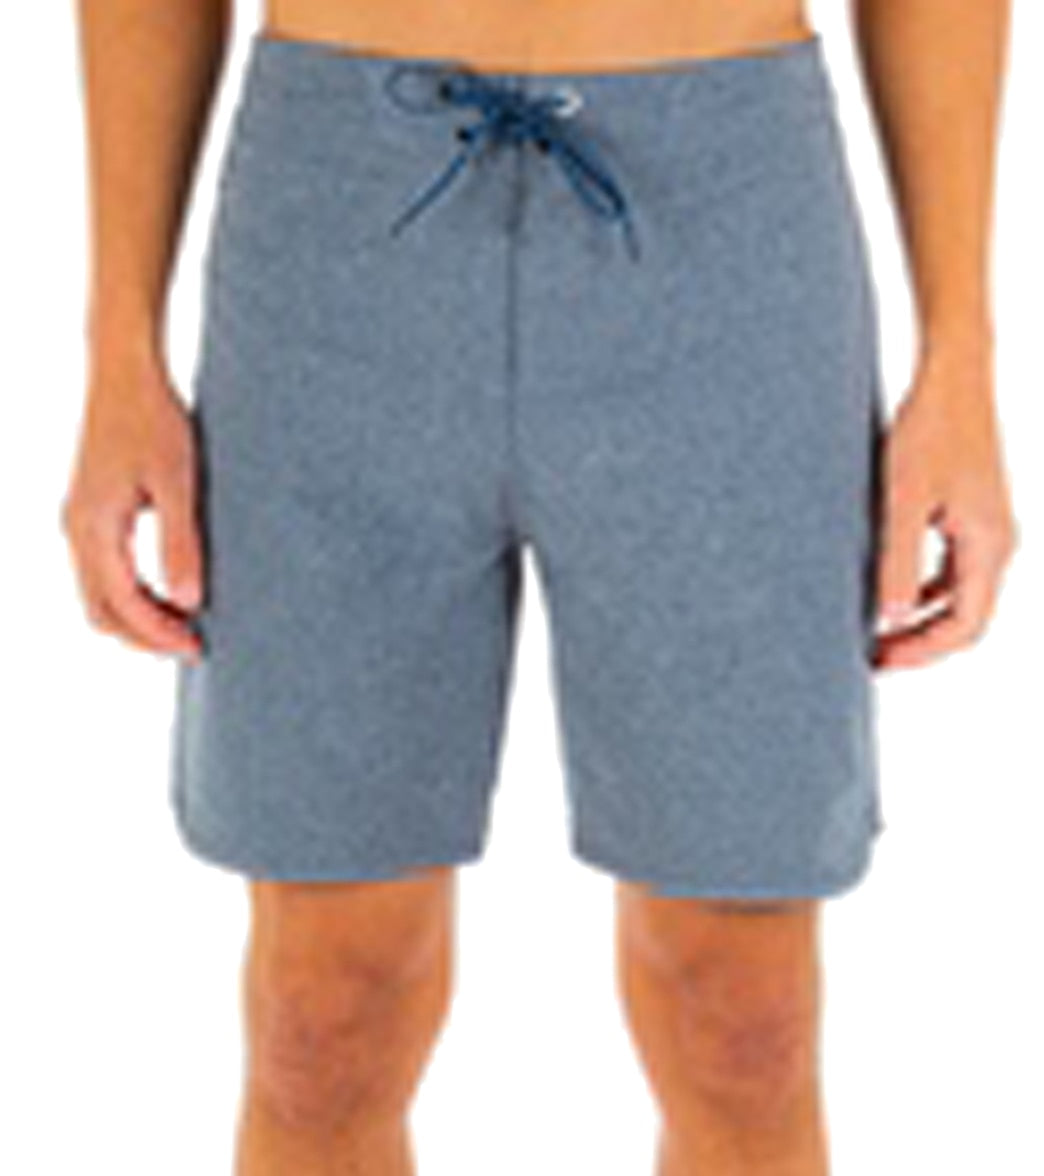 Hurley Phantom One And Only Heather 18 Boardshorts - Obsidian/Heather 30 - Swimoutlet.com